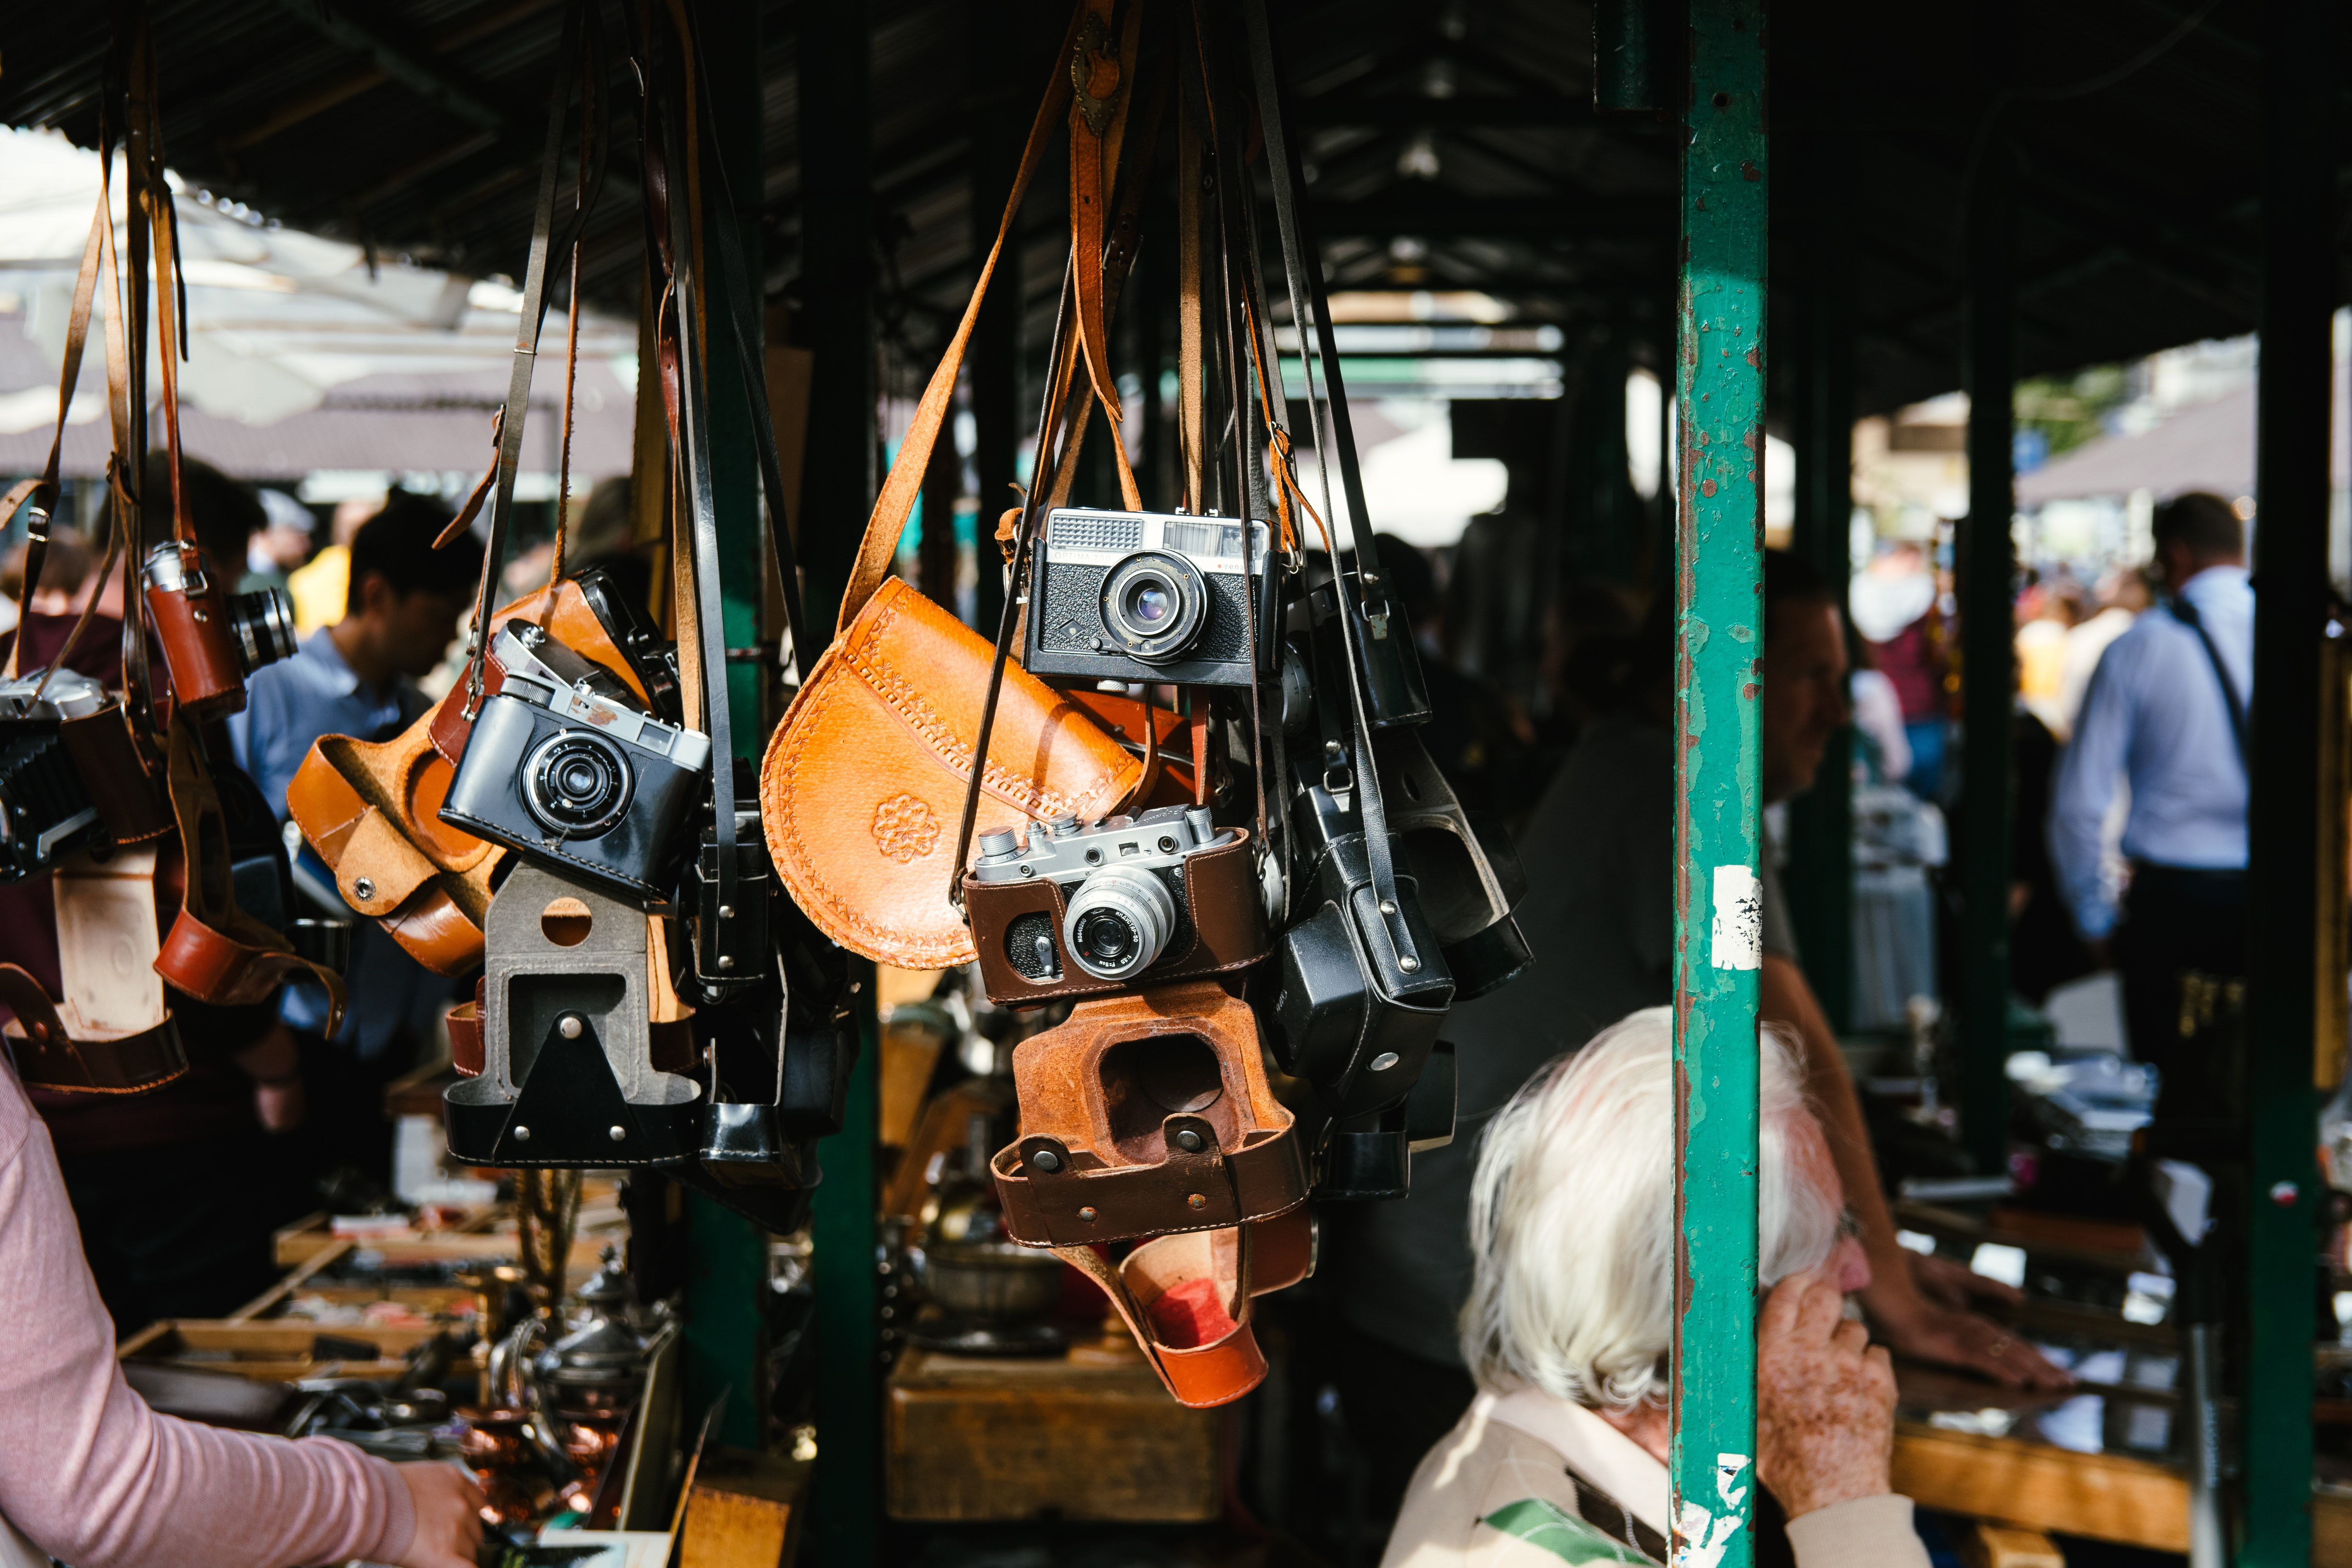 Search for Treasure at the Best Flea Markets in Redmond